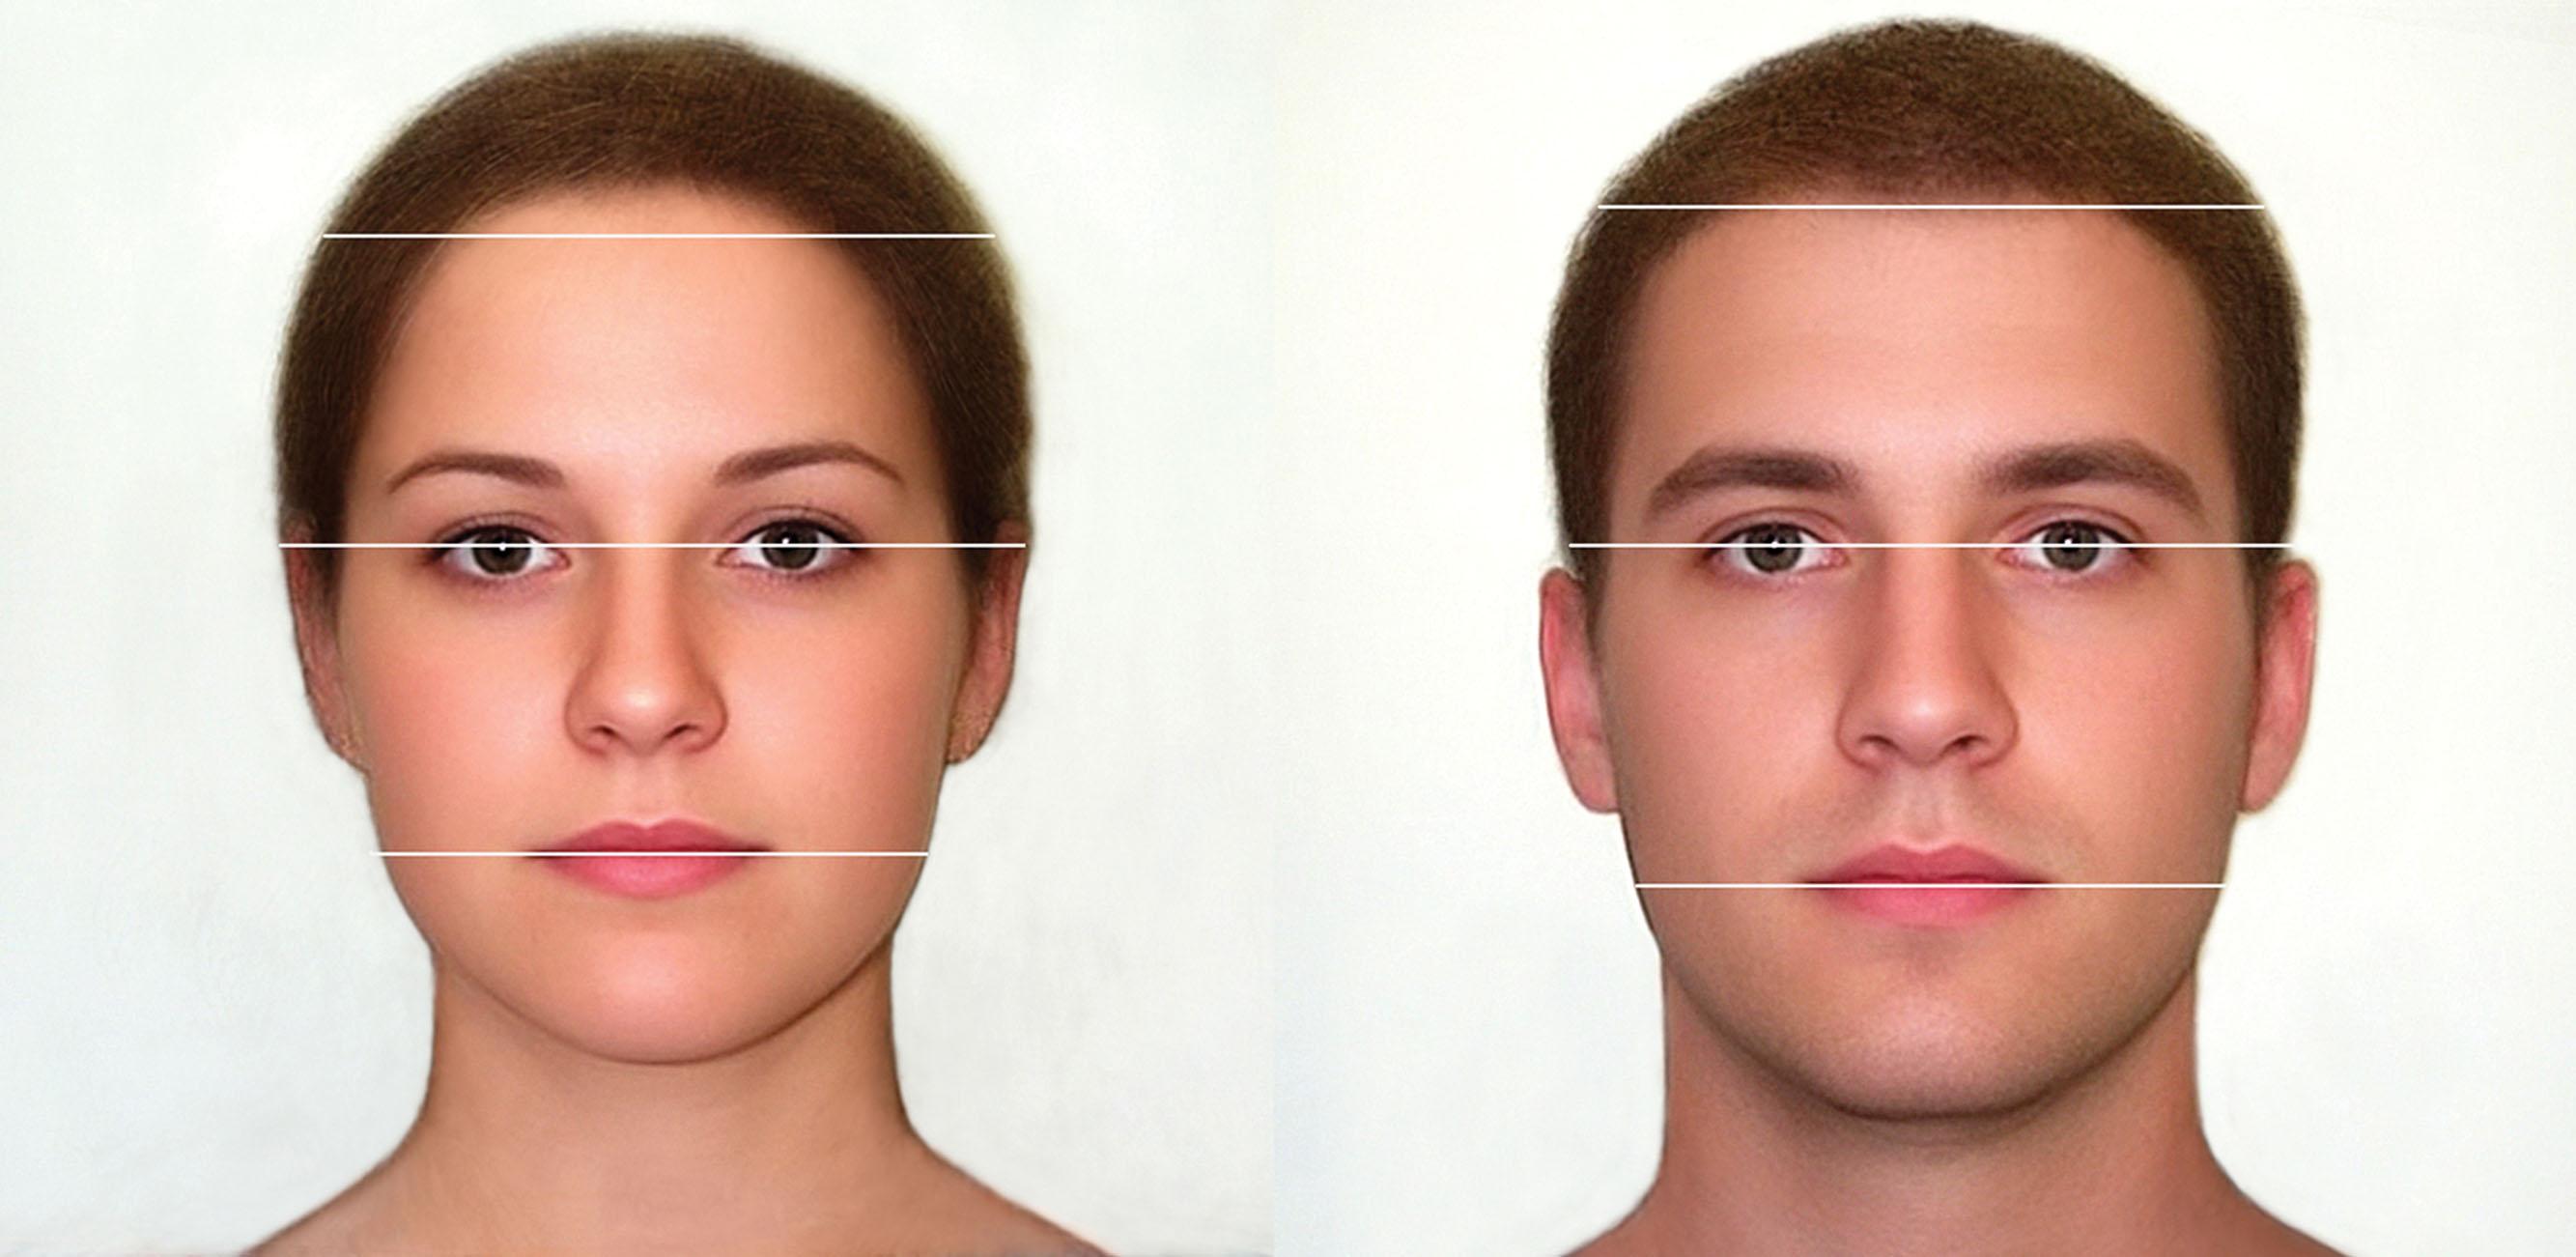 Figure 17.5, Male and female prototypes and the Lipuhai Rule. Prototype of a woman with a rounded hairline and a man with an M-shaped pattern. The Lipuhai Rule states the distance between the interpupillary line and the intercommissural line is applied to the upper facial third. In general, with men it coincides with the hairline, while with women it falls somewhat below.